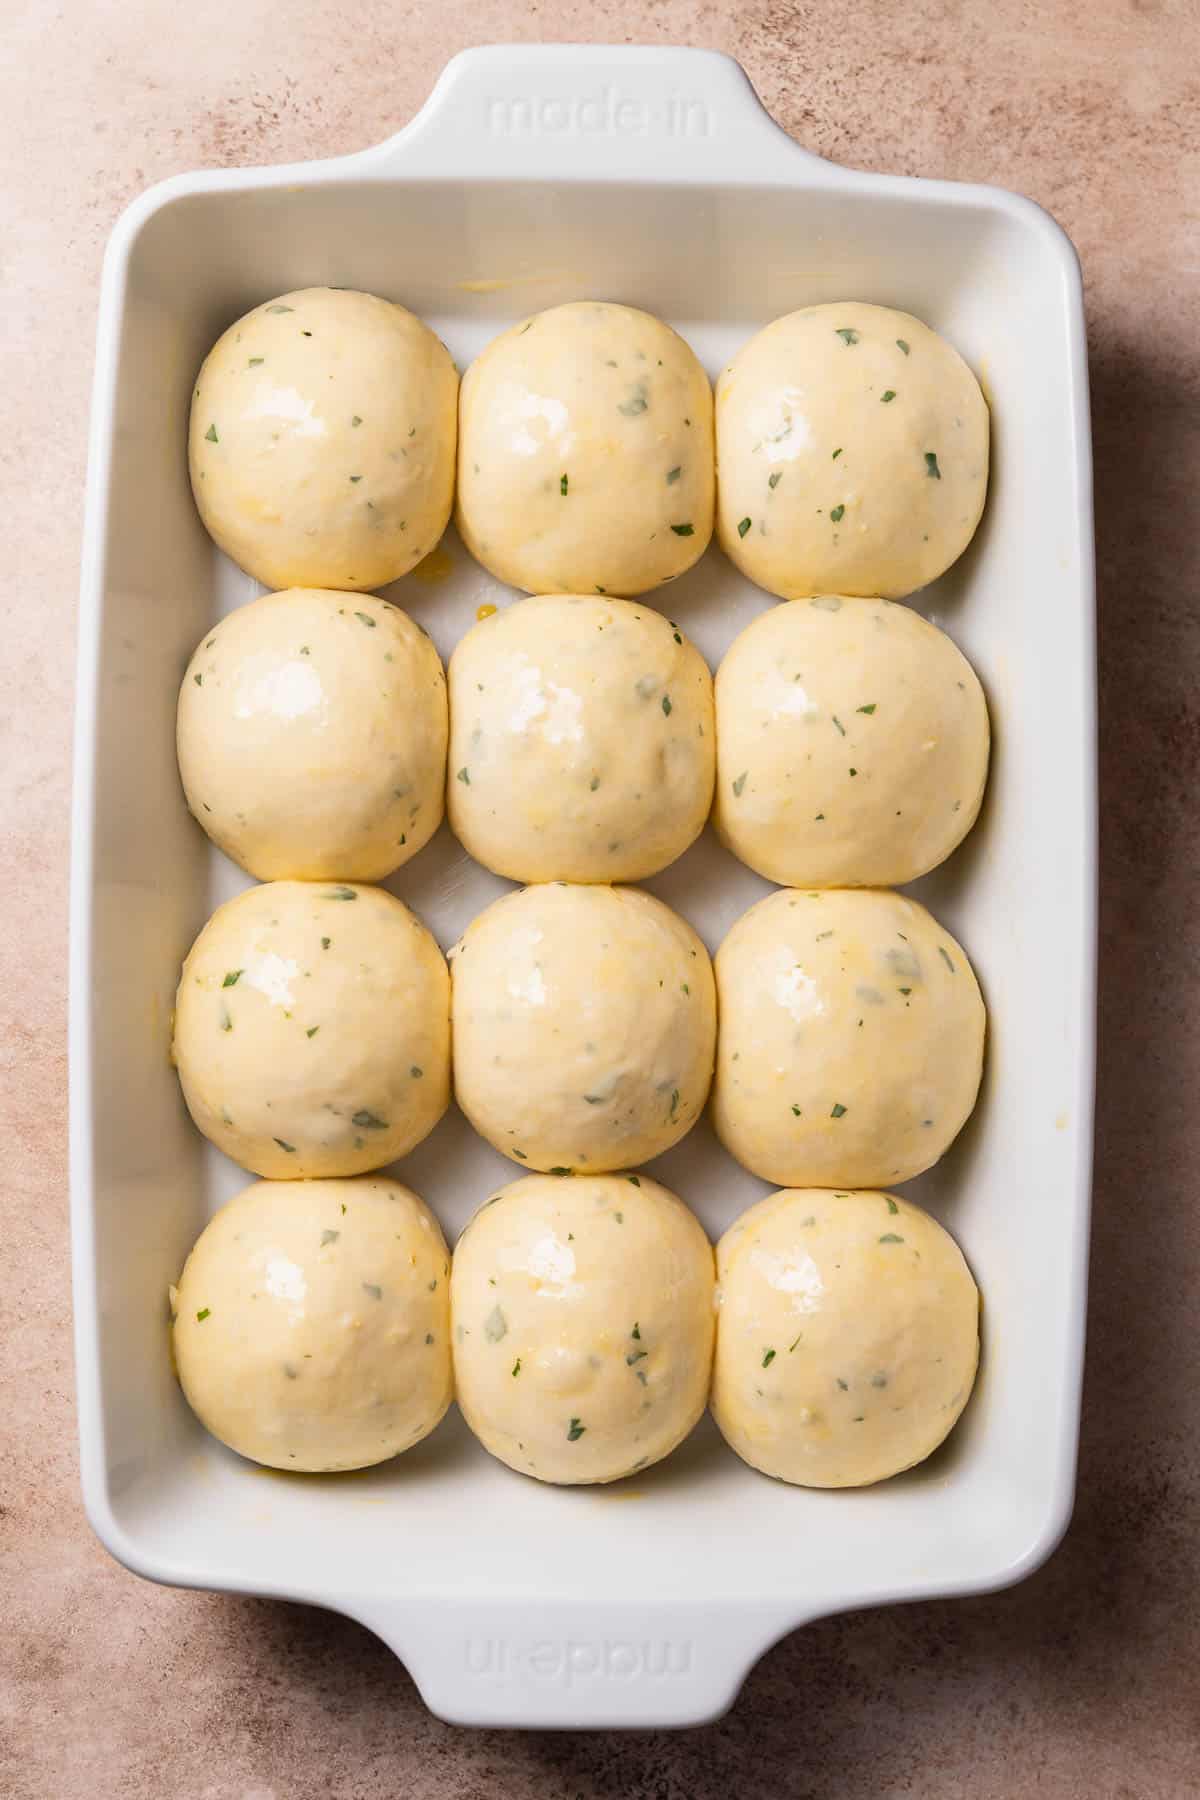 The garlic rolls in a baking pan brushed with egg wash before baking.